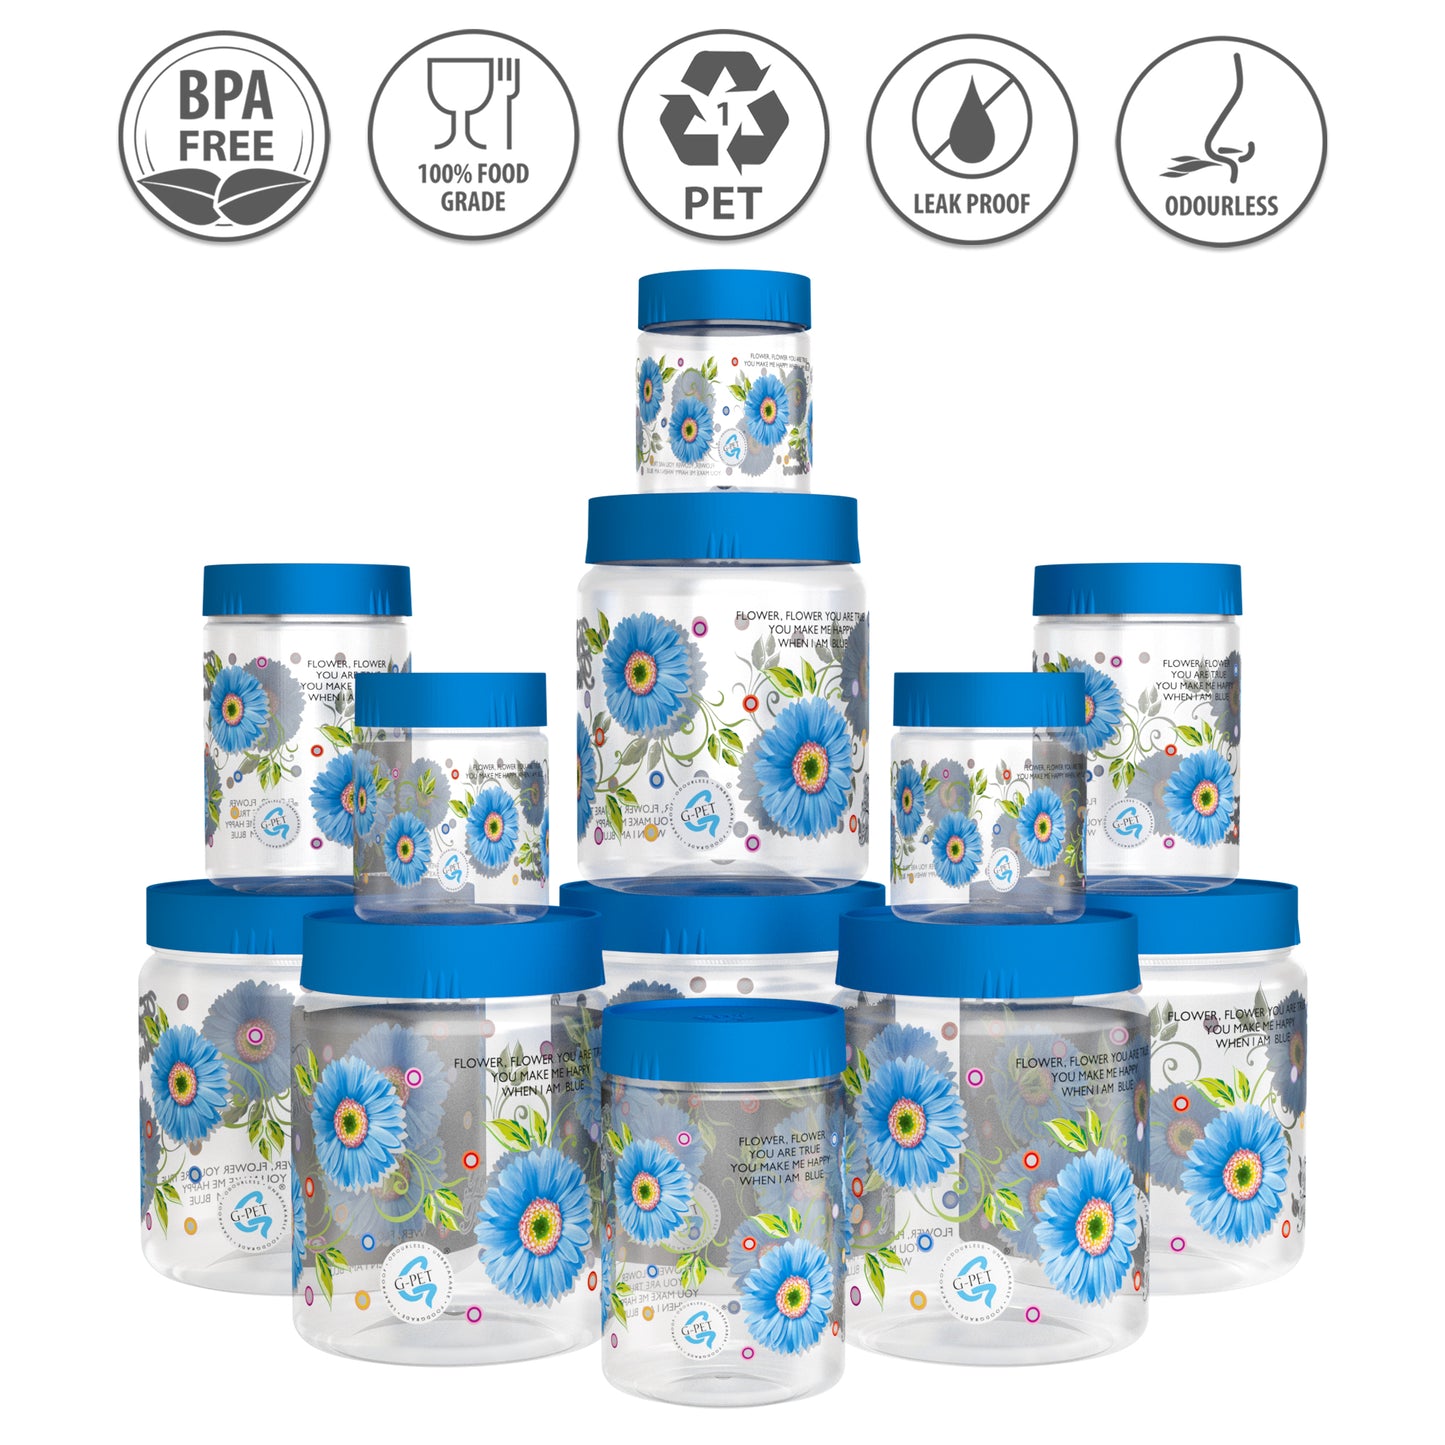 Print Magic Container Blue Pack of 12- 1500ml (3 pcs), 1000ml (3 pcs), 450ml (3 pcs) 200ml (3 pcs) Plastic Grocery Container